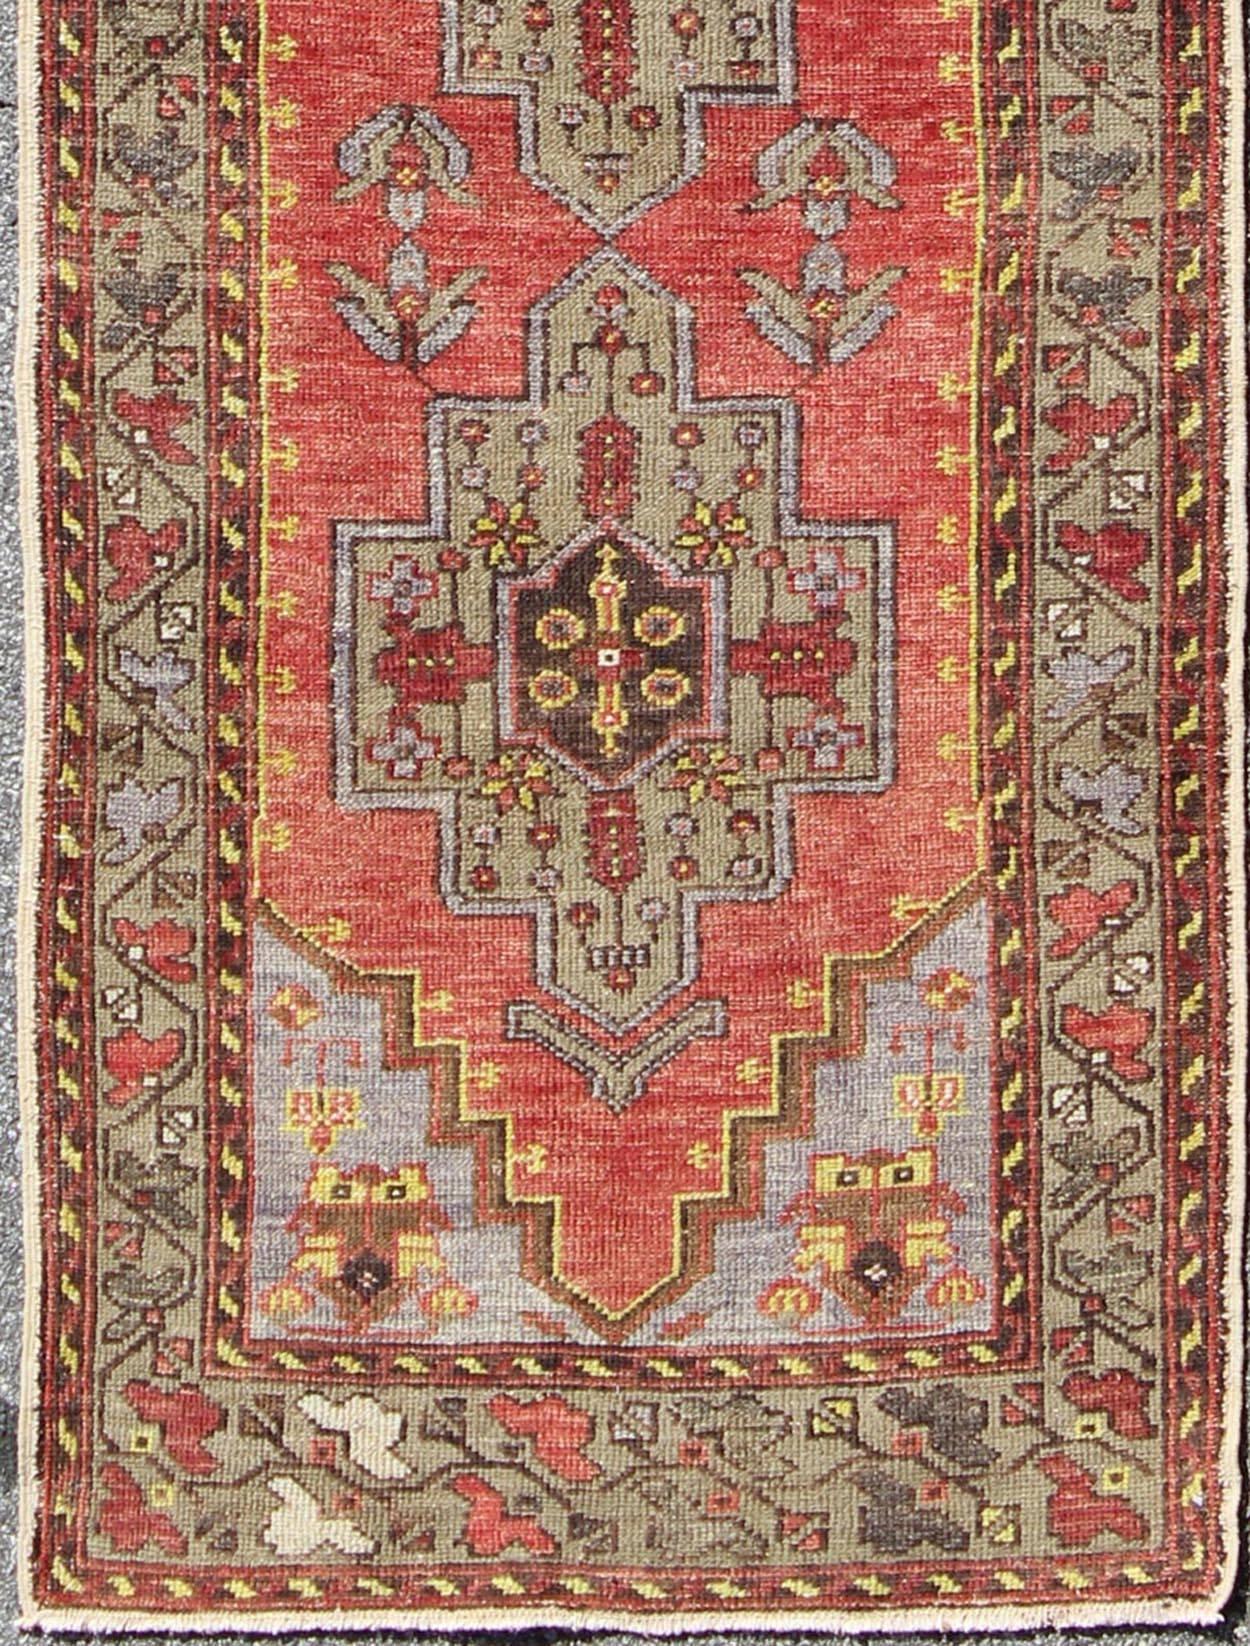 Cross Medallions Vintage Oushak Runner from Turkey in Burnt Orange and Olive, rug en-973, country of origin / type: Turkey / Oushak, circa 1930

This vintage Turkish Oushak runner (circa 1930) features a unique blend of colors and an intricately